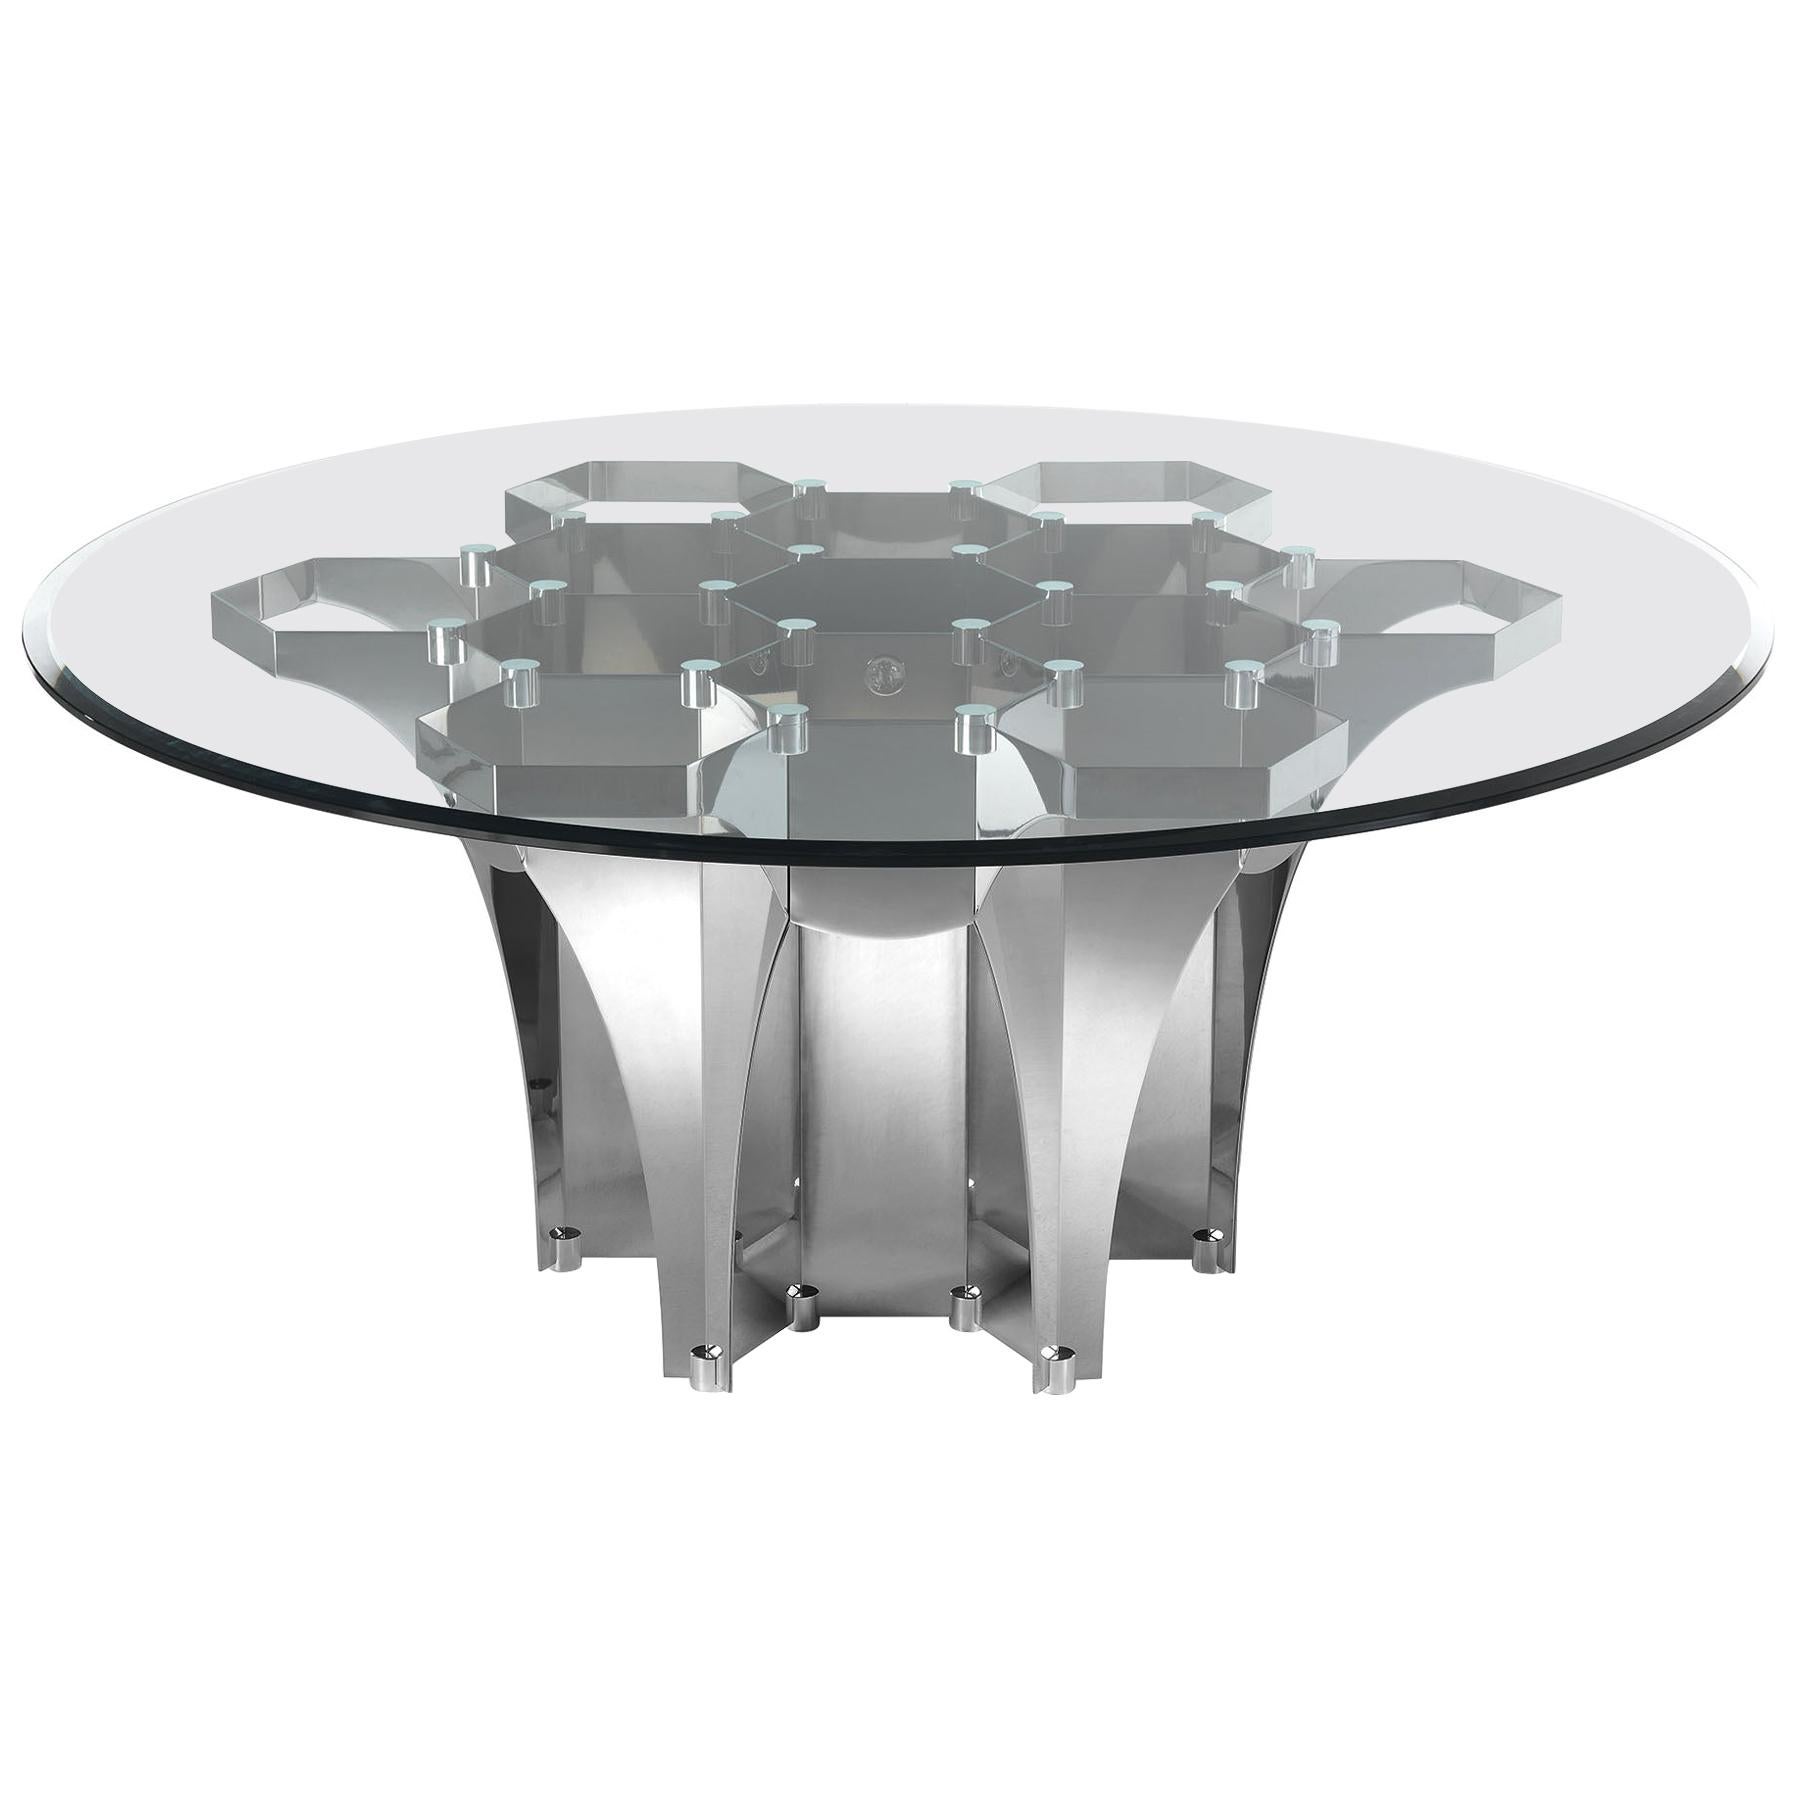 Roberto Cavalli Home Interiors Soho Round Dining Table with Metal Base